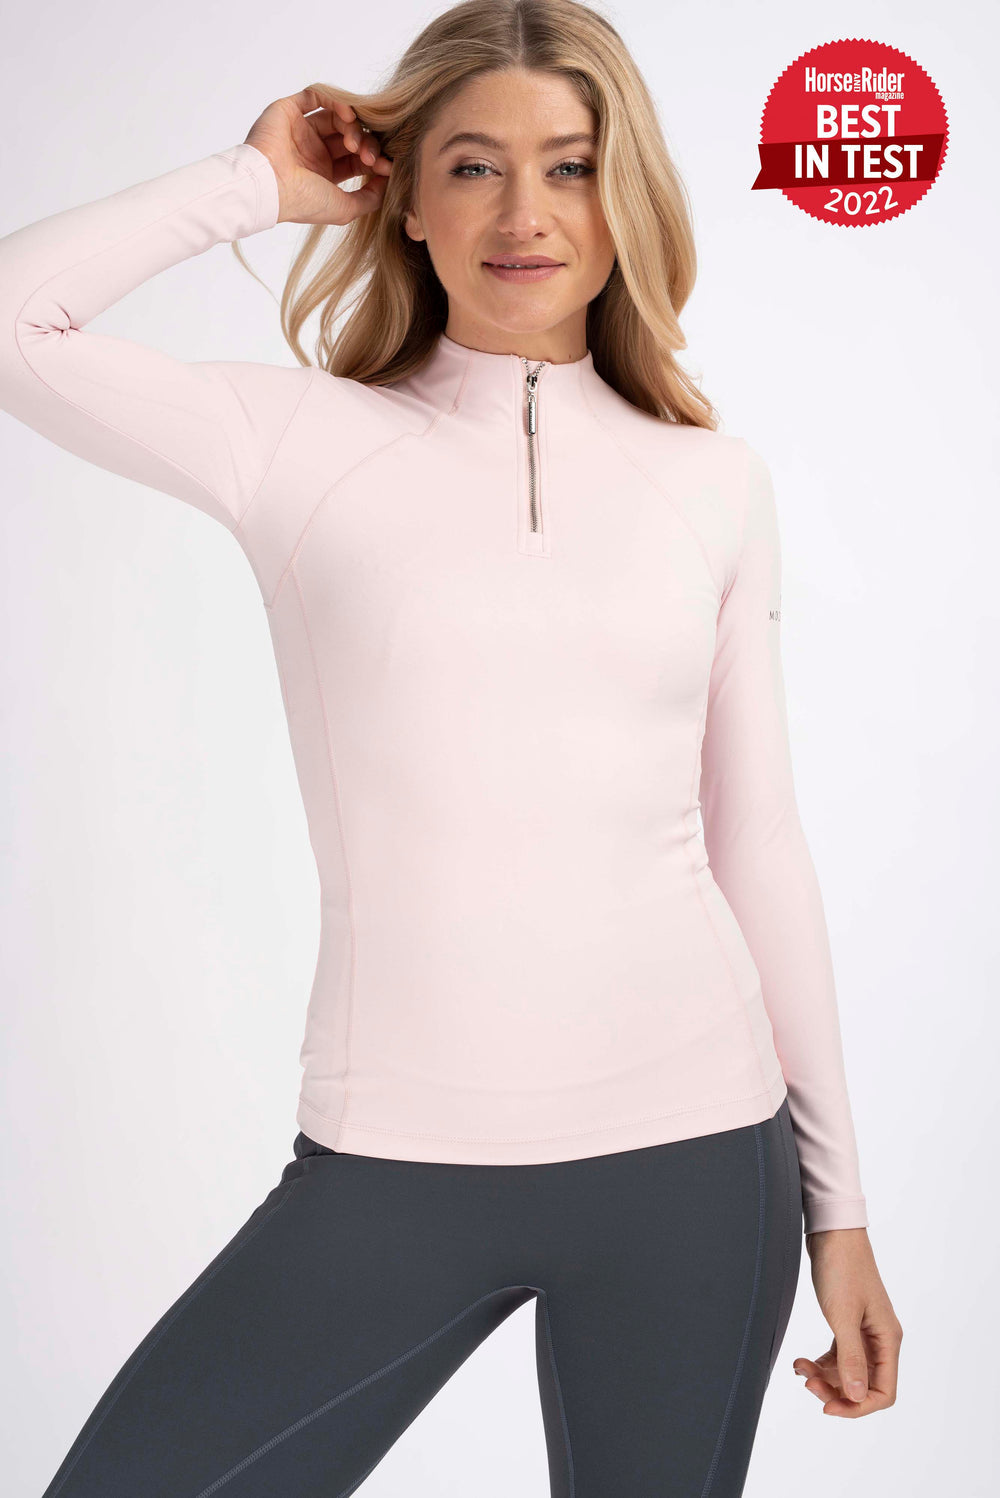 Mochara Technical Base Layer-Southern Sport Horses-The Equestrian